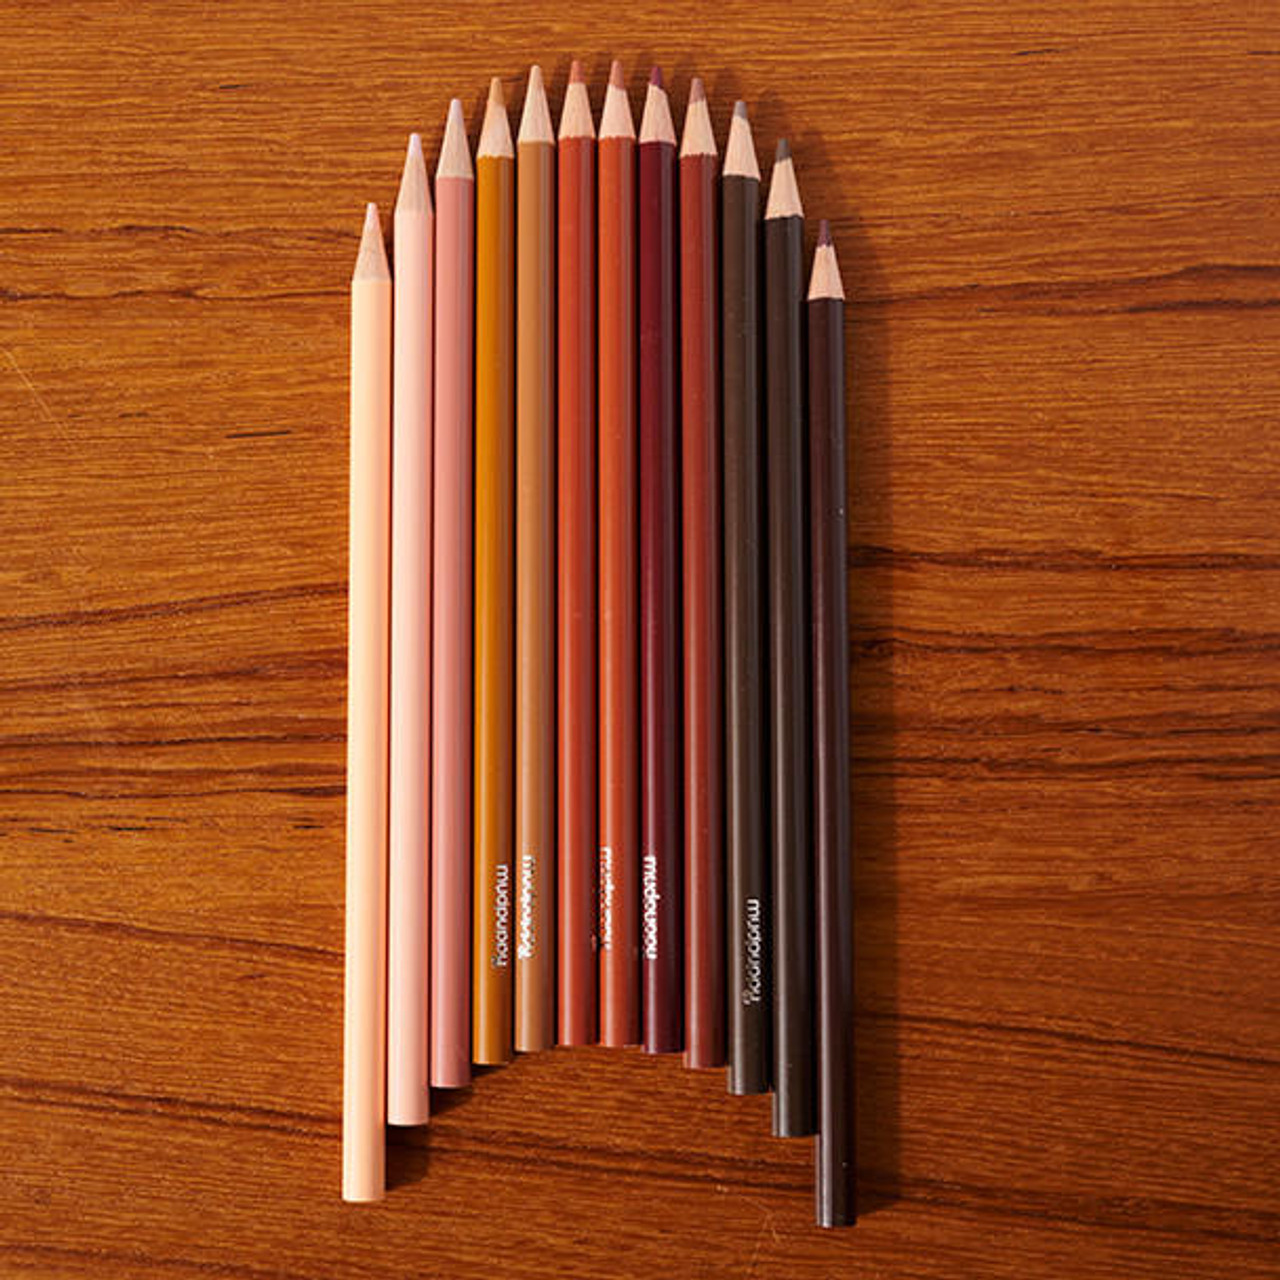 https://cdn11.bigcommerce.com/s-3rl2qg0z2p/images/stencil/1280x1280/products/13422/40656/we-are-colorful-skin-tone-colored-pencils__15972.1678844509.jpg?c=1?imbypass=on